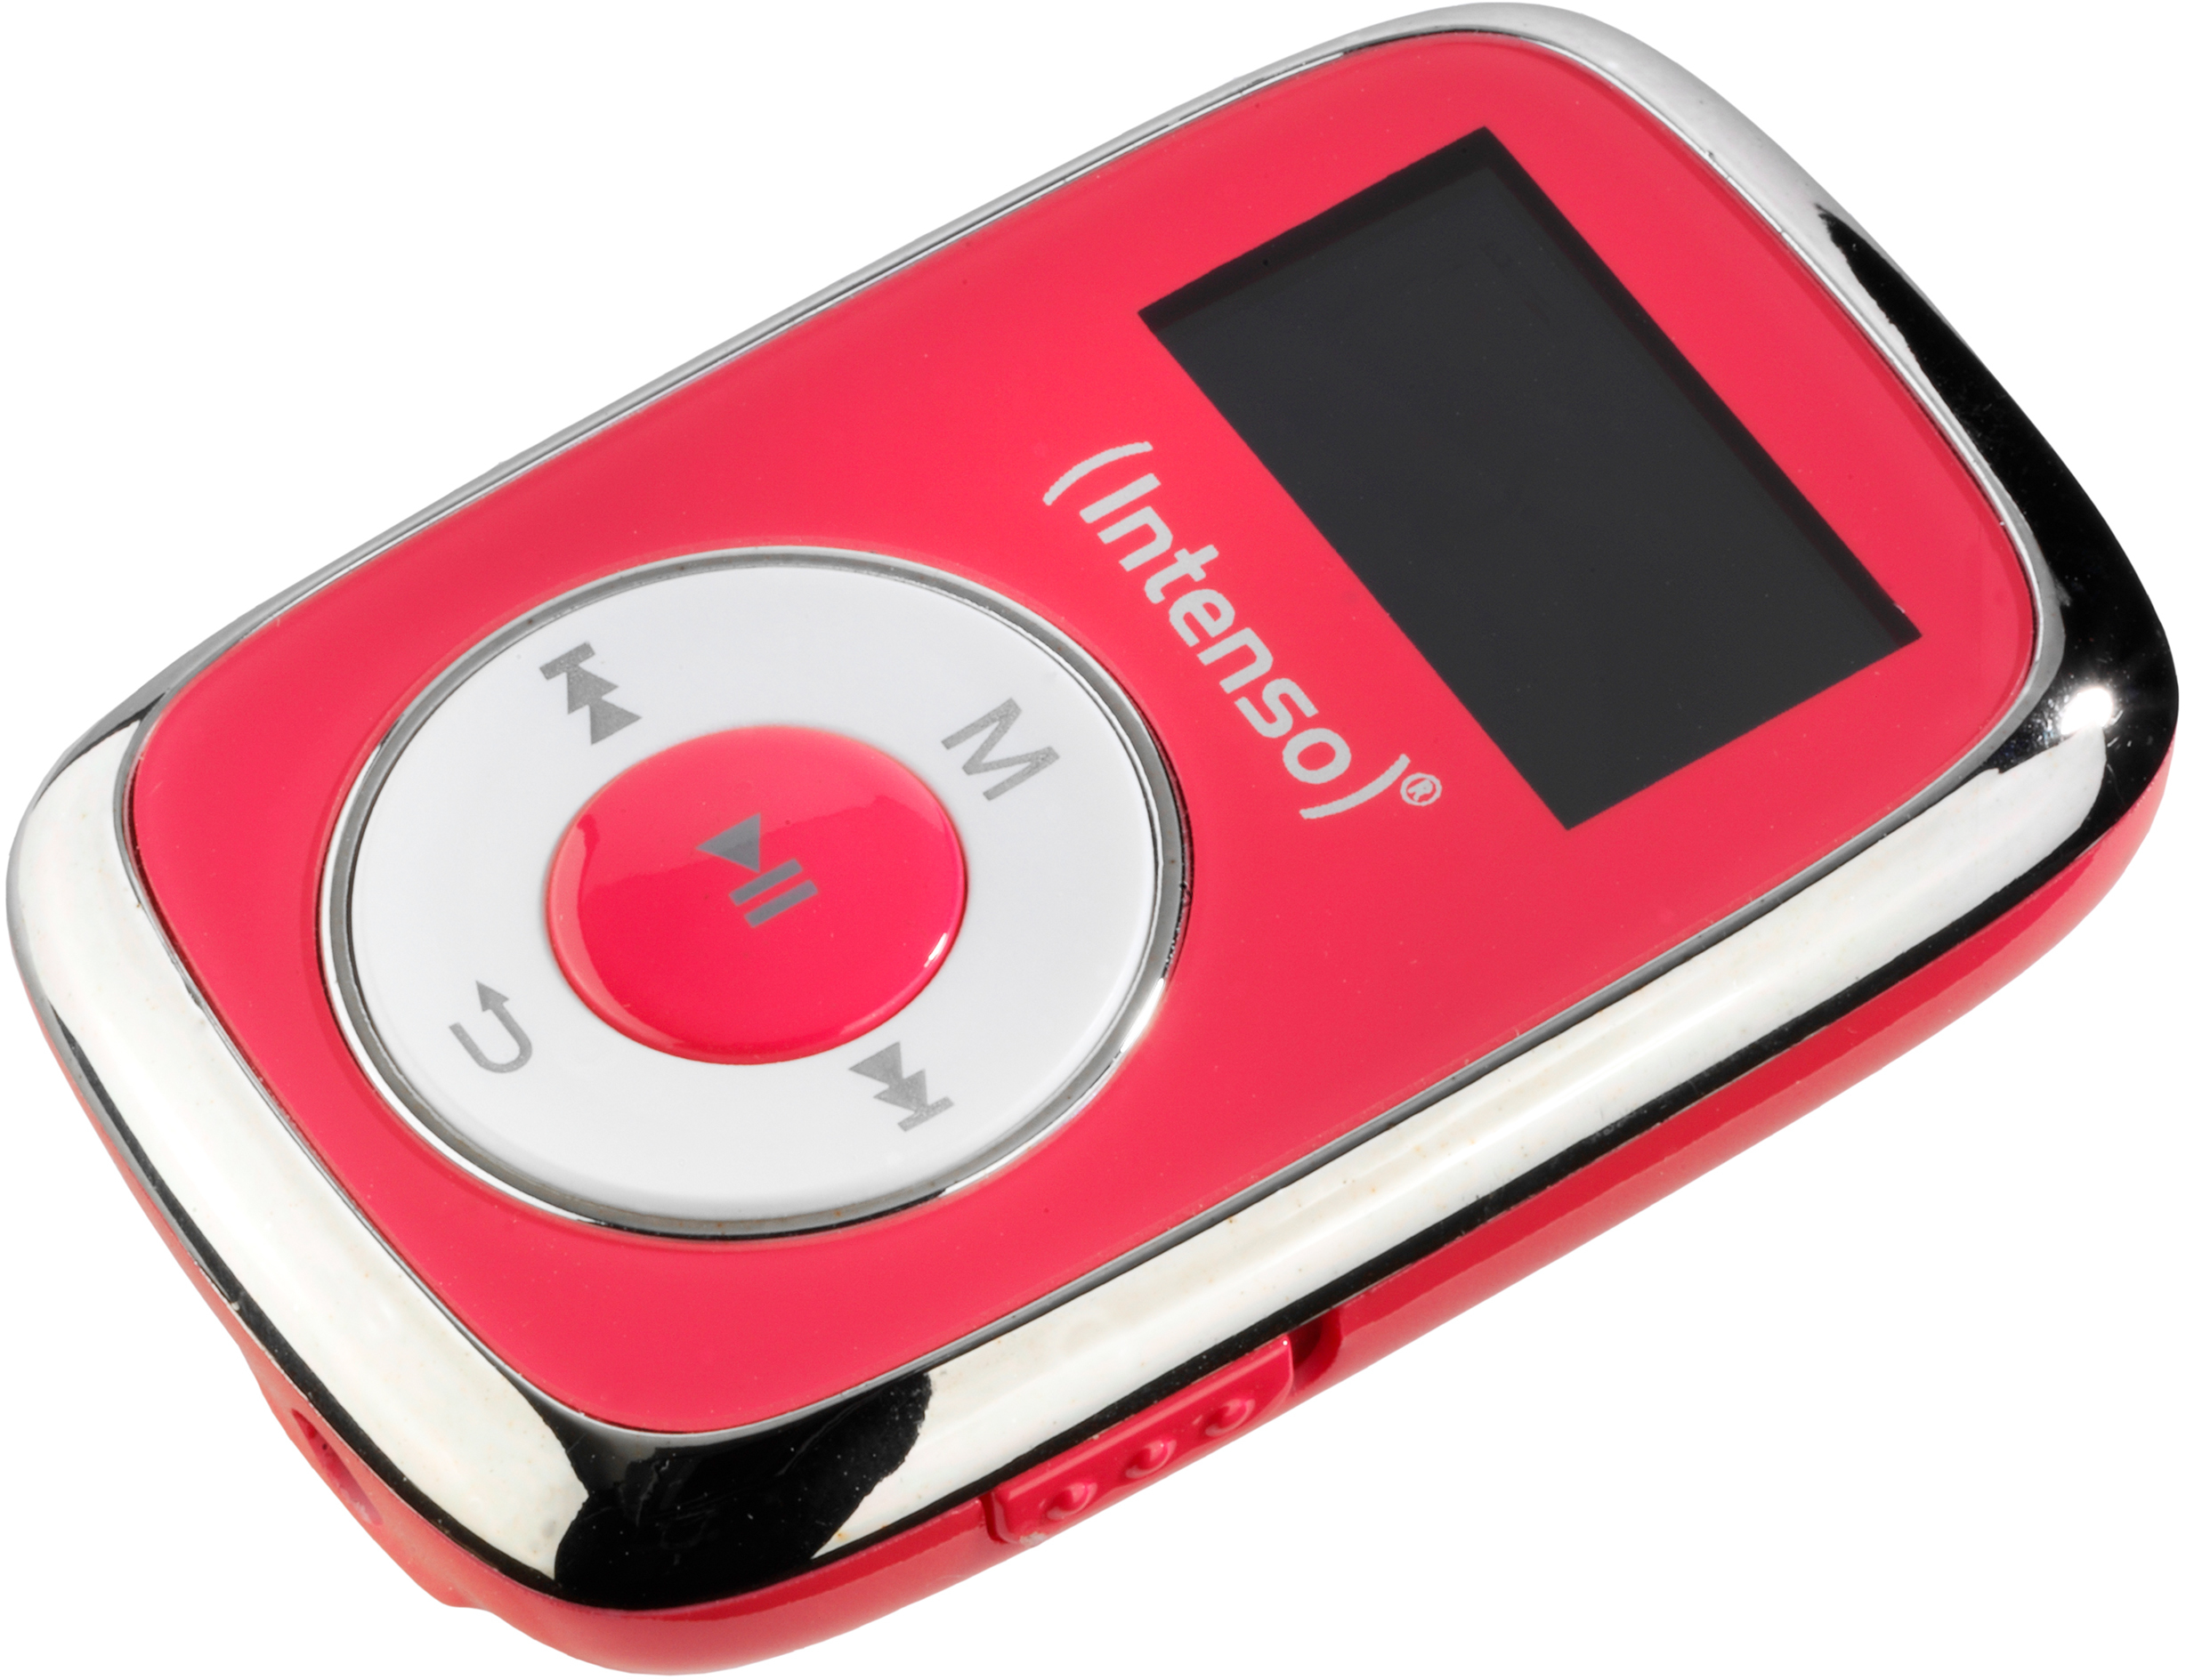 GB, Mover Music INTENSO Mp3-Player (8 Pink)